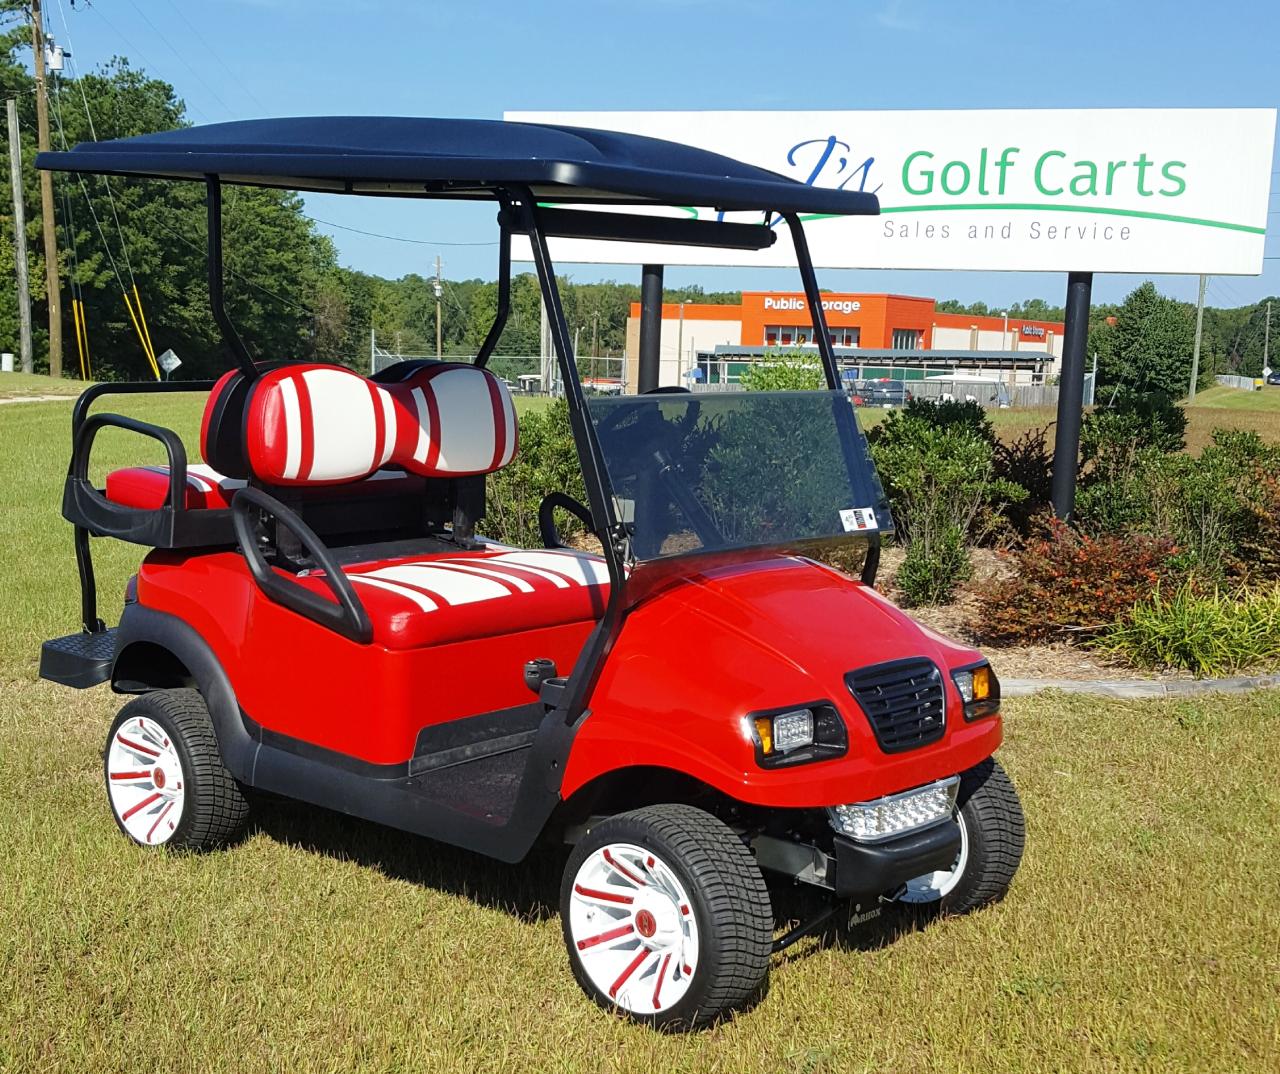 Used Golf Carts for Sale by Owner in Elbert, Colorado: Find Your Dream Ride Today